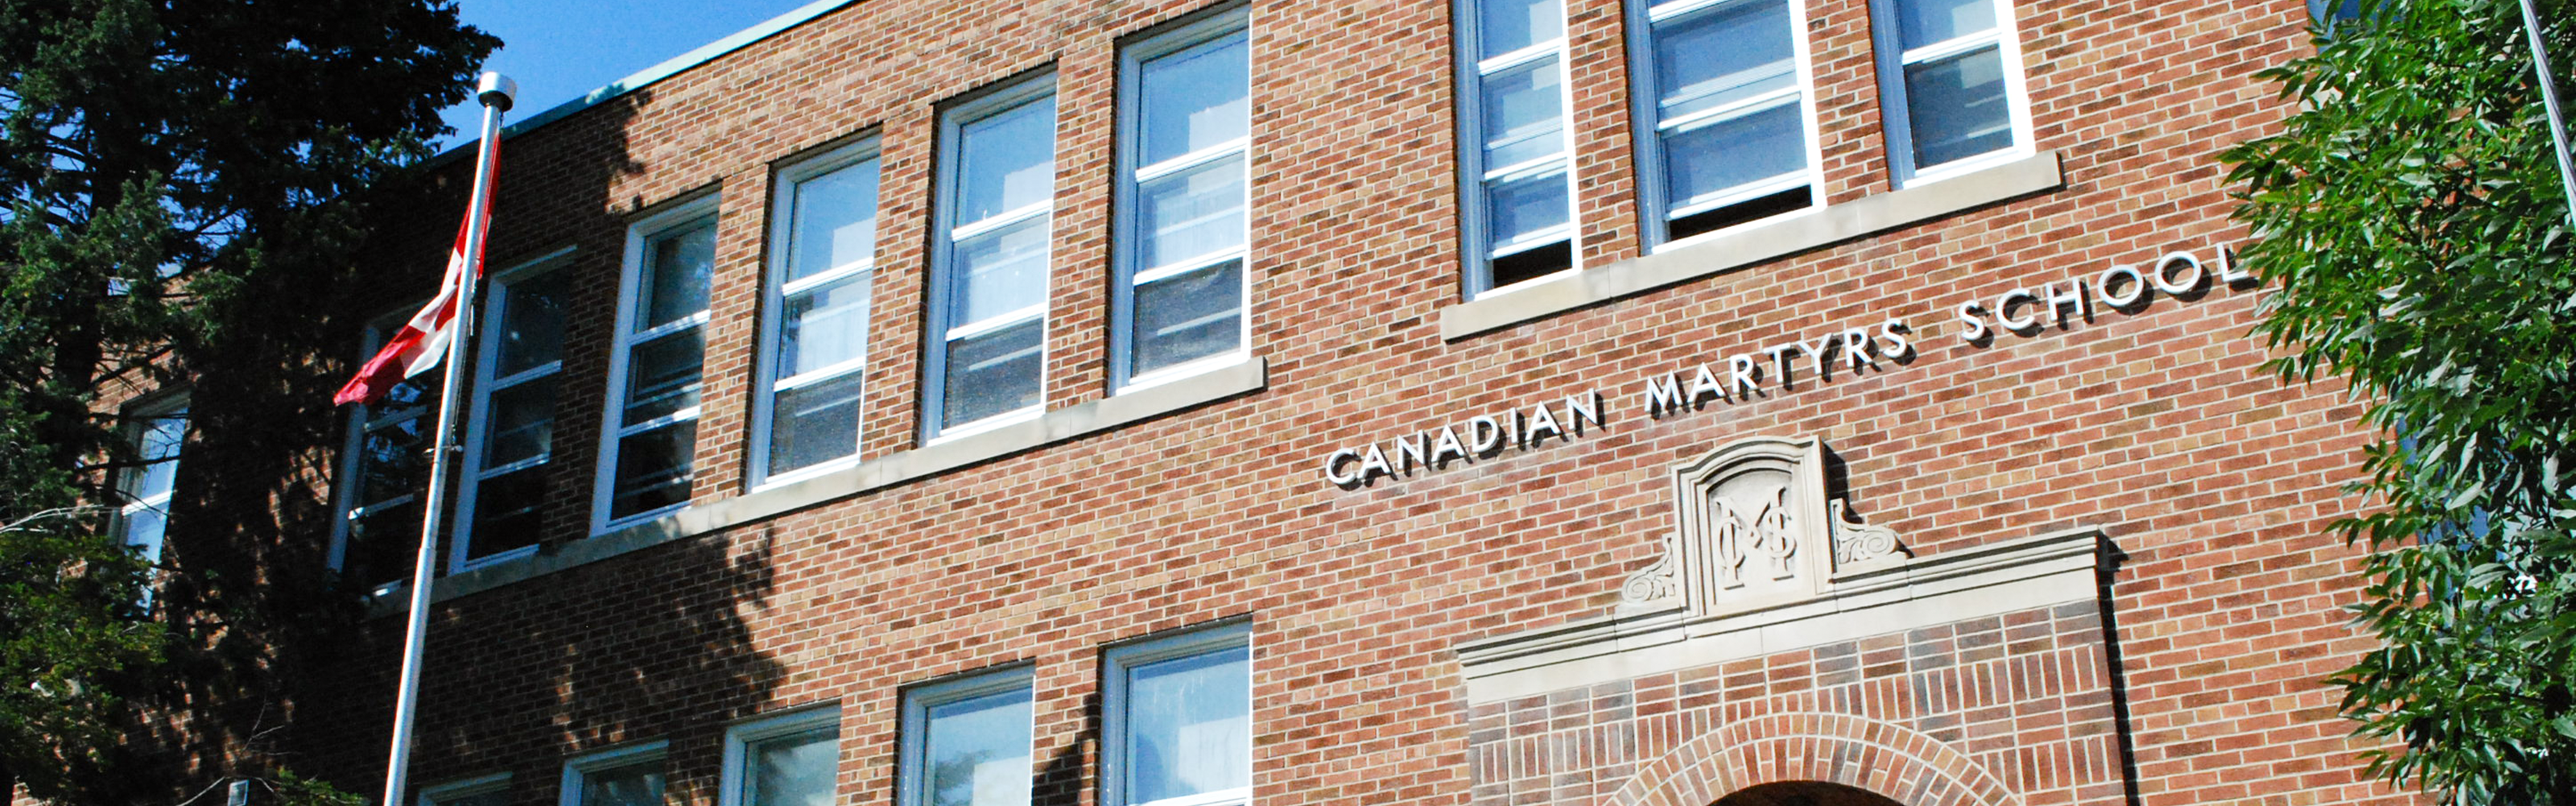 Front of the Canadian Martyrs Catholic School building